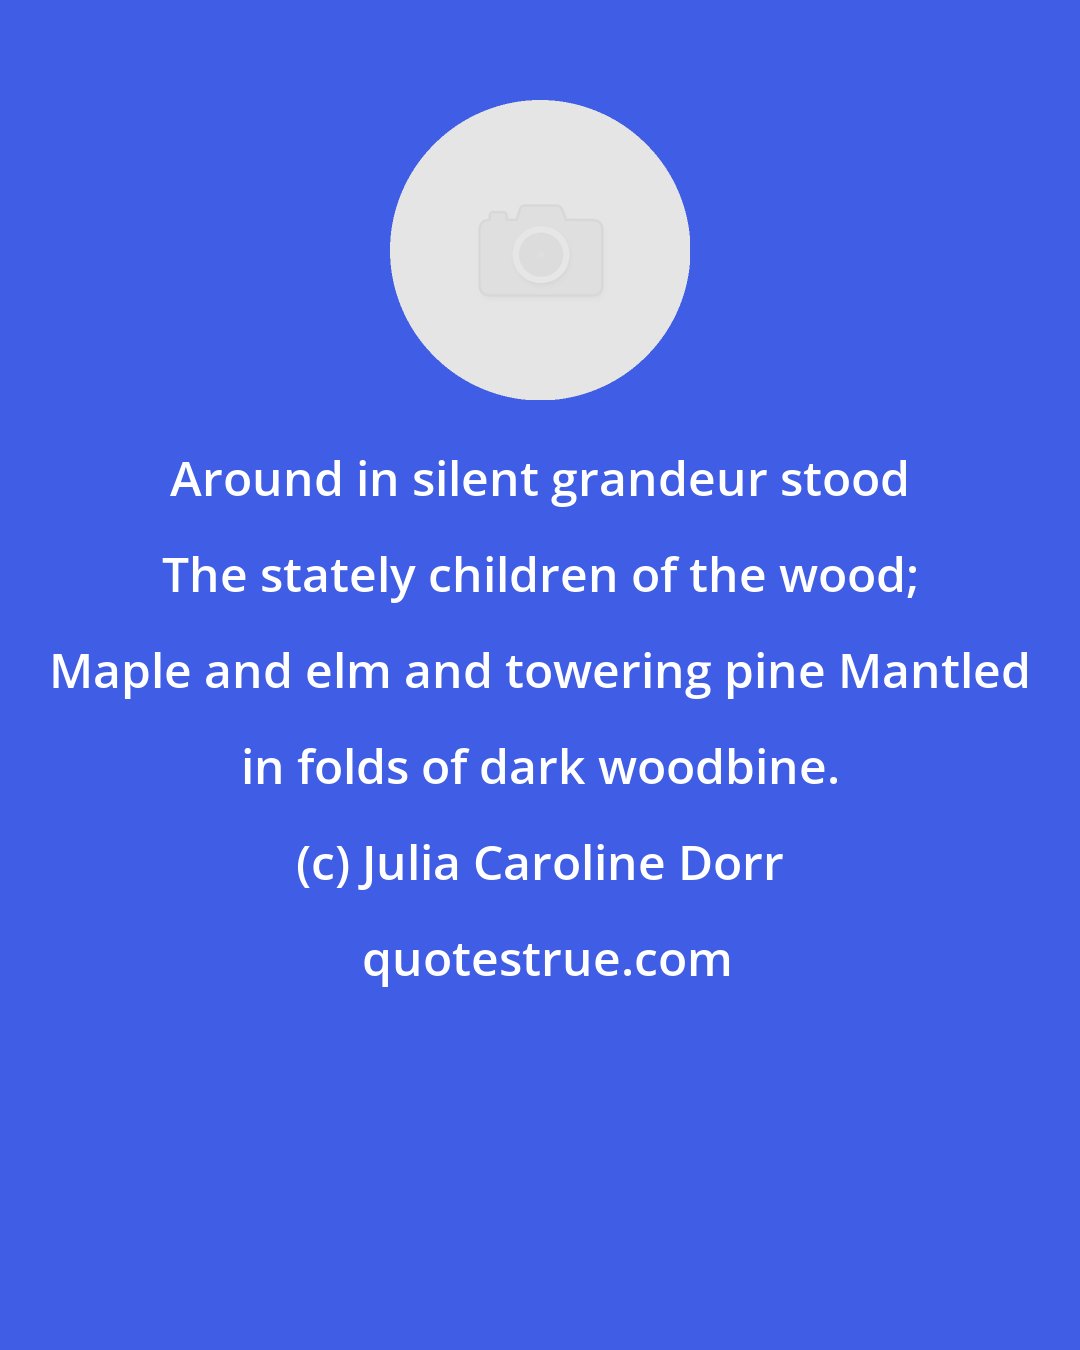 Julia Caroline Dorr: Around in silent grandeur stood The stately children of the wood; Maple and elm and towering pine Mantled in folds of dark woodbine.